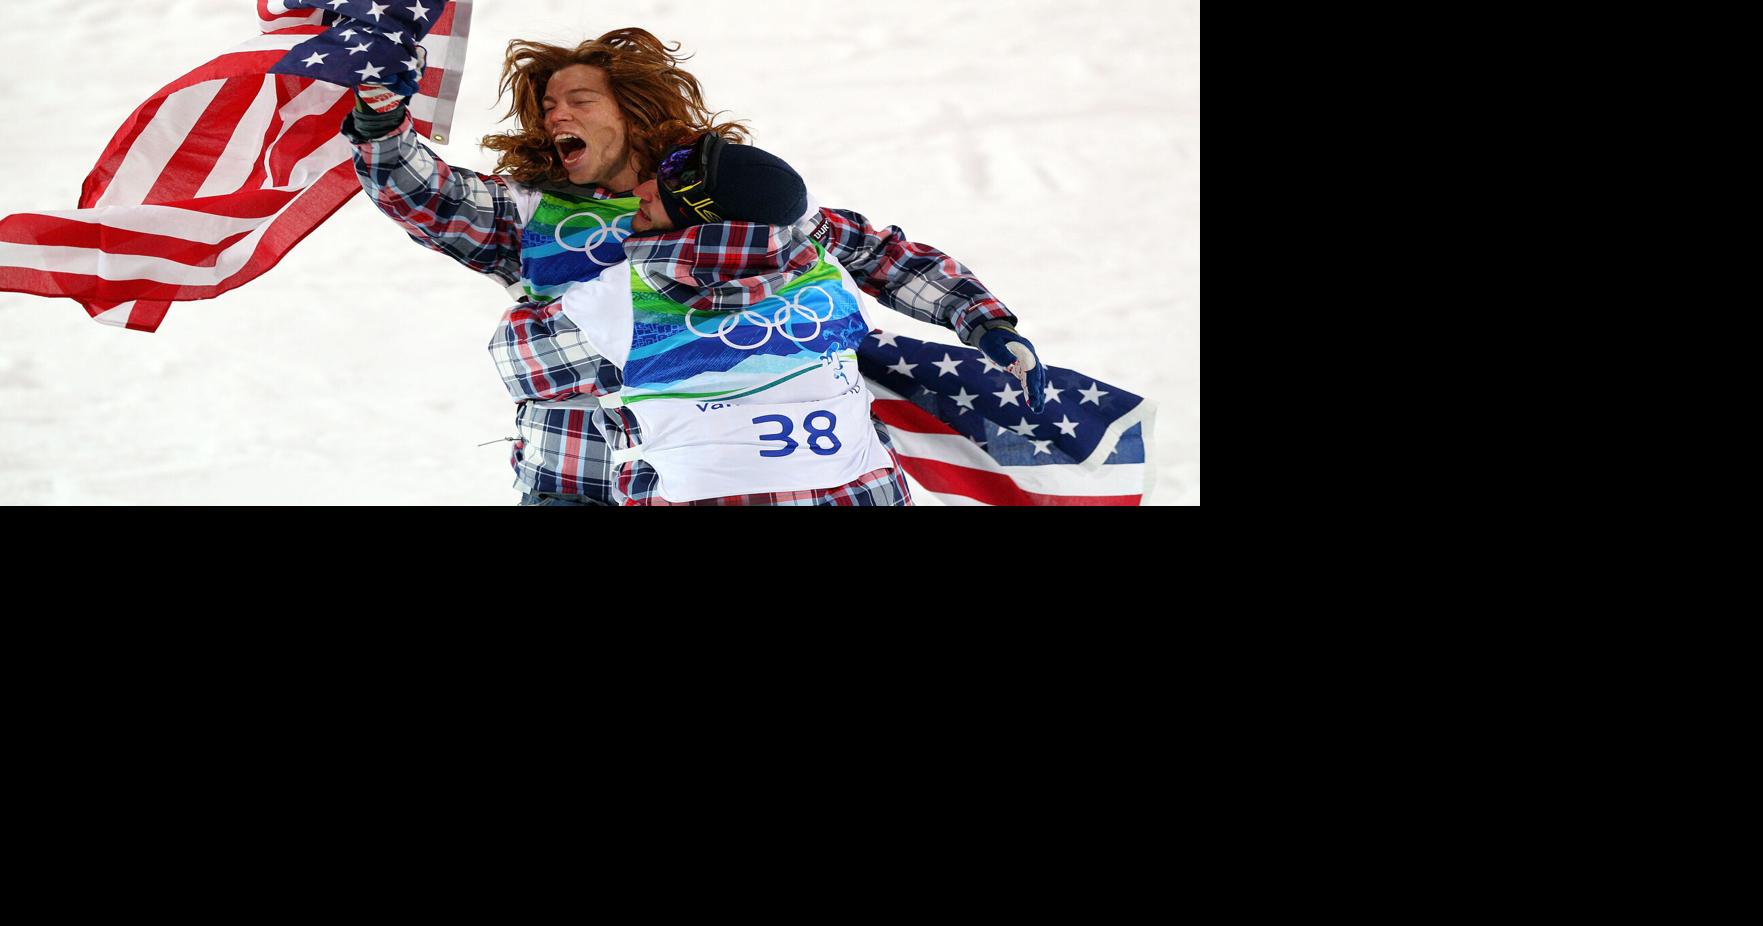 Shaun White: 'I've decided this will be my last Olympics,' says US  snowboarder as injuries take toll, Sport